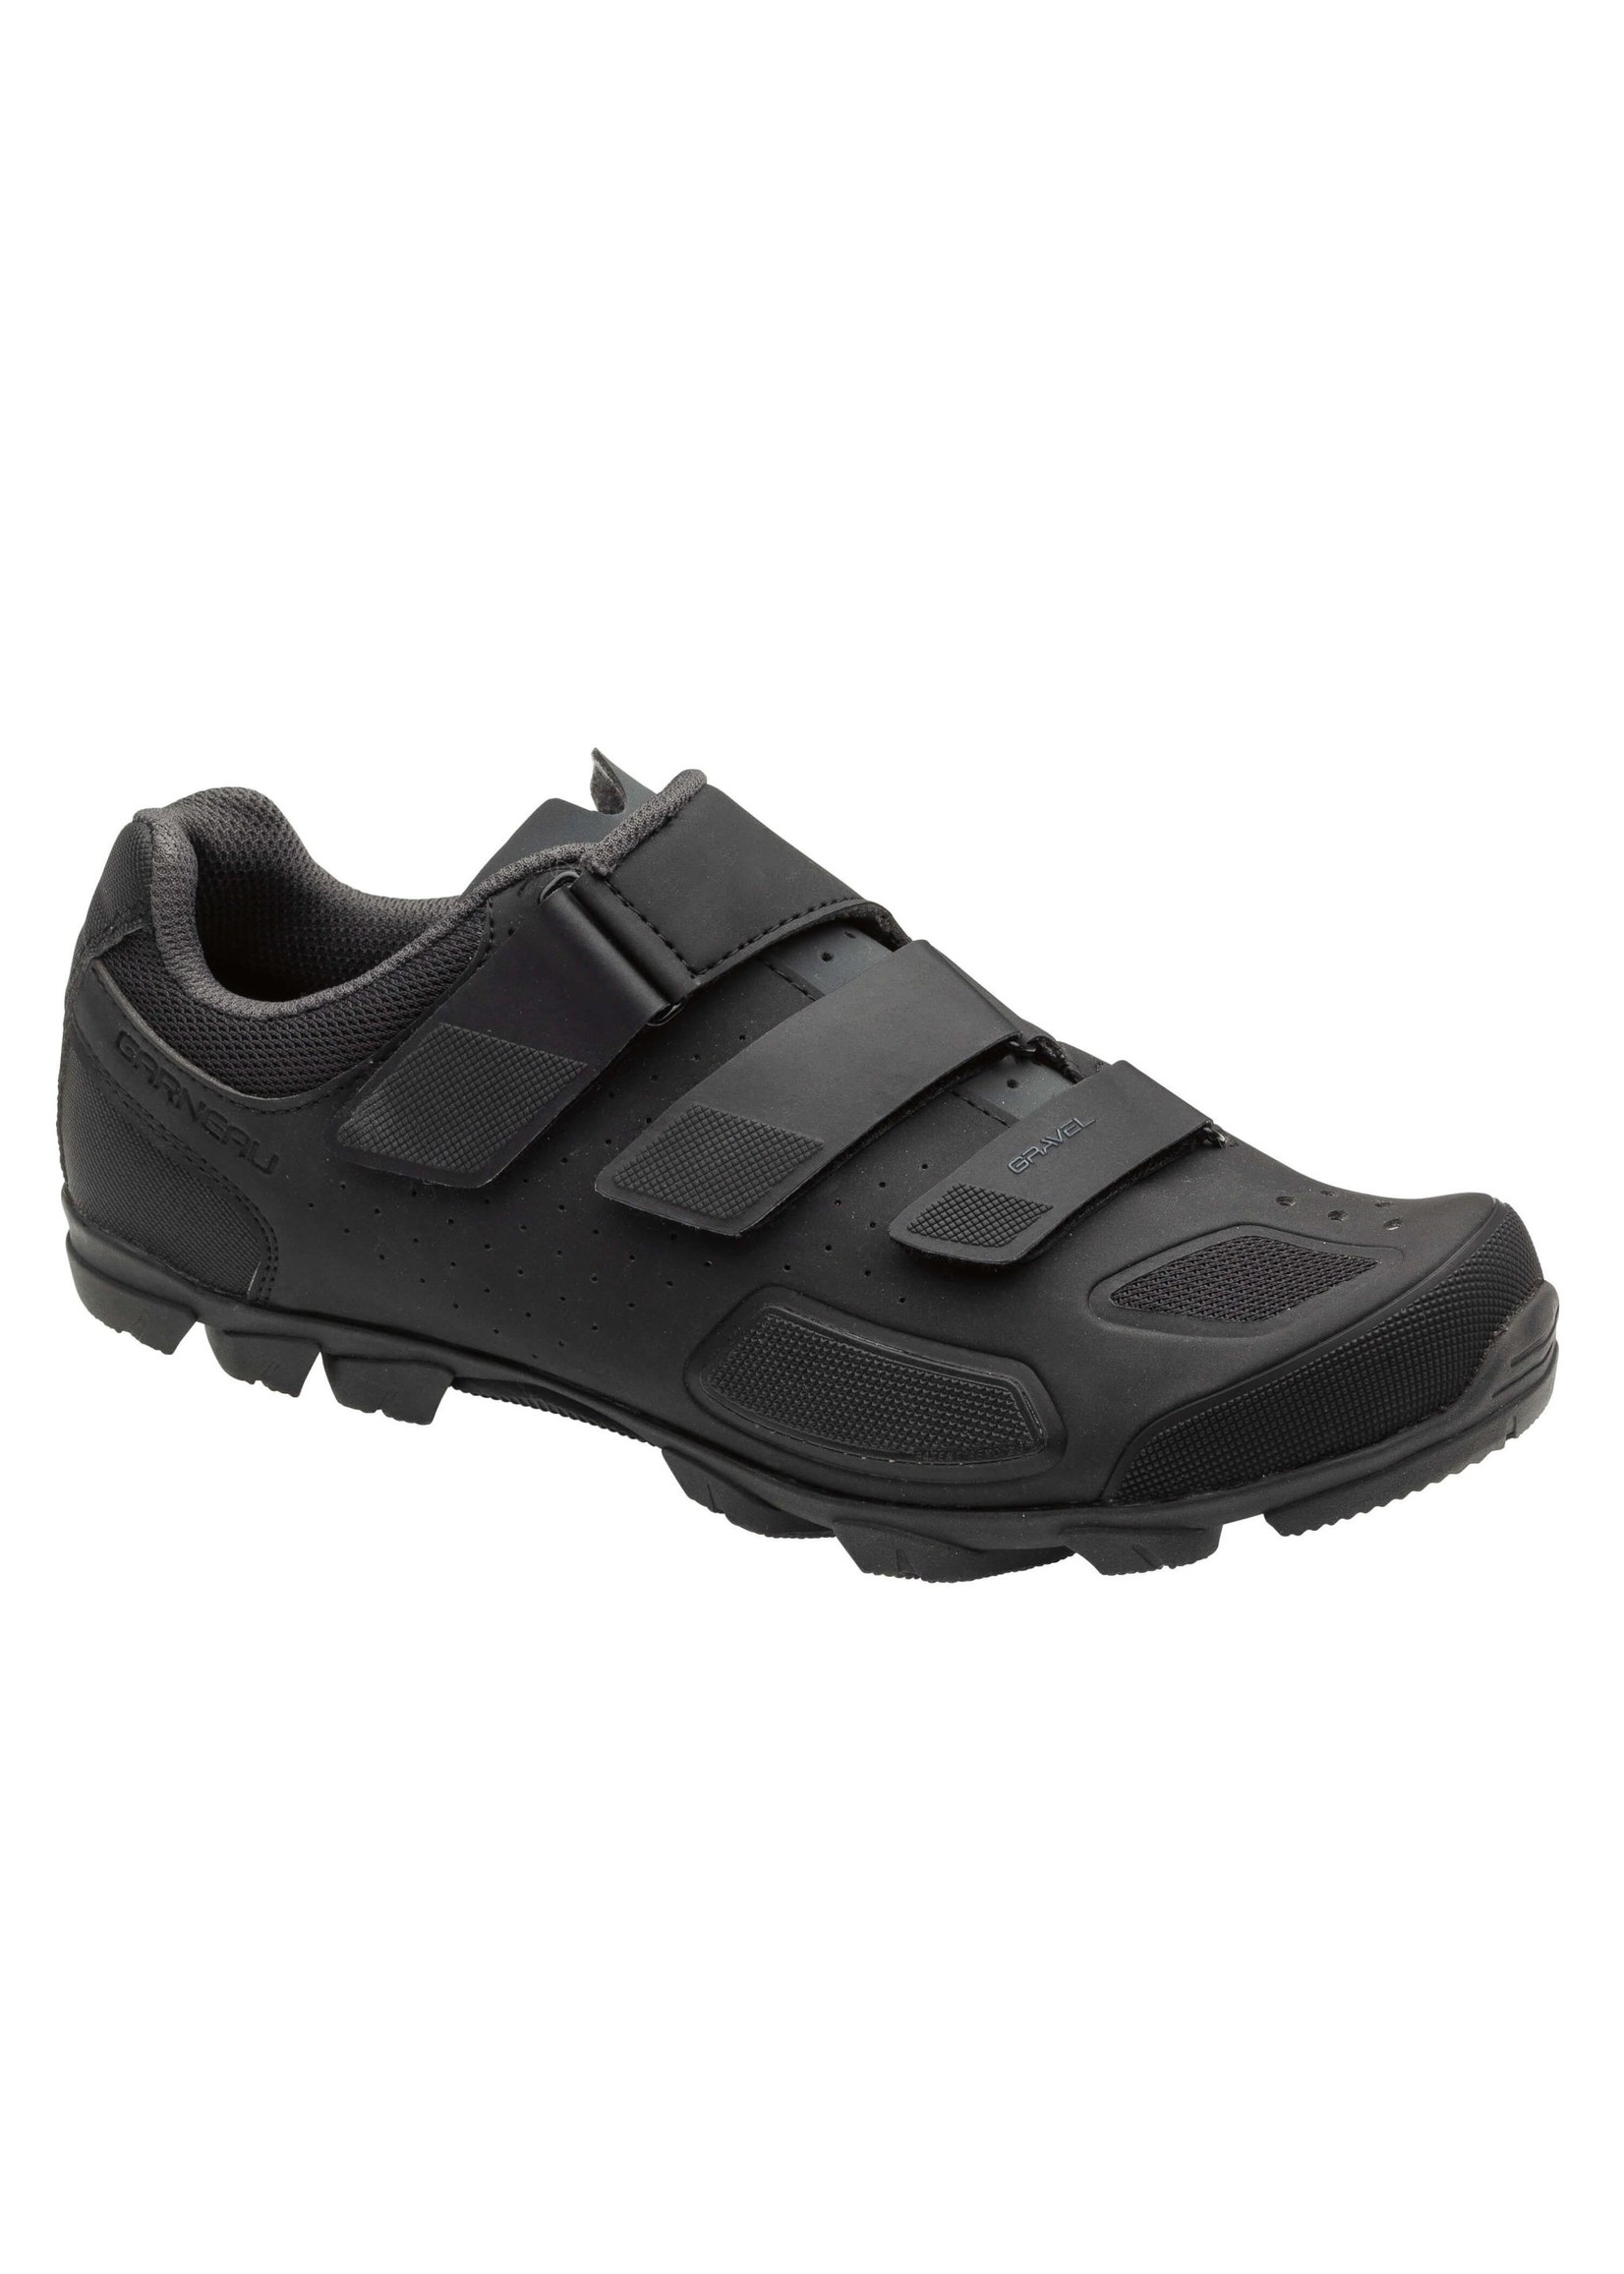 CHAMPION Souliers cyclistes Gravel II